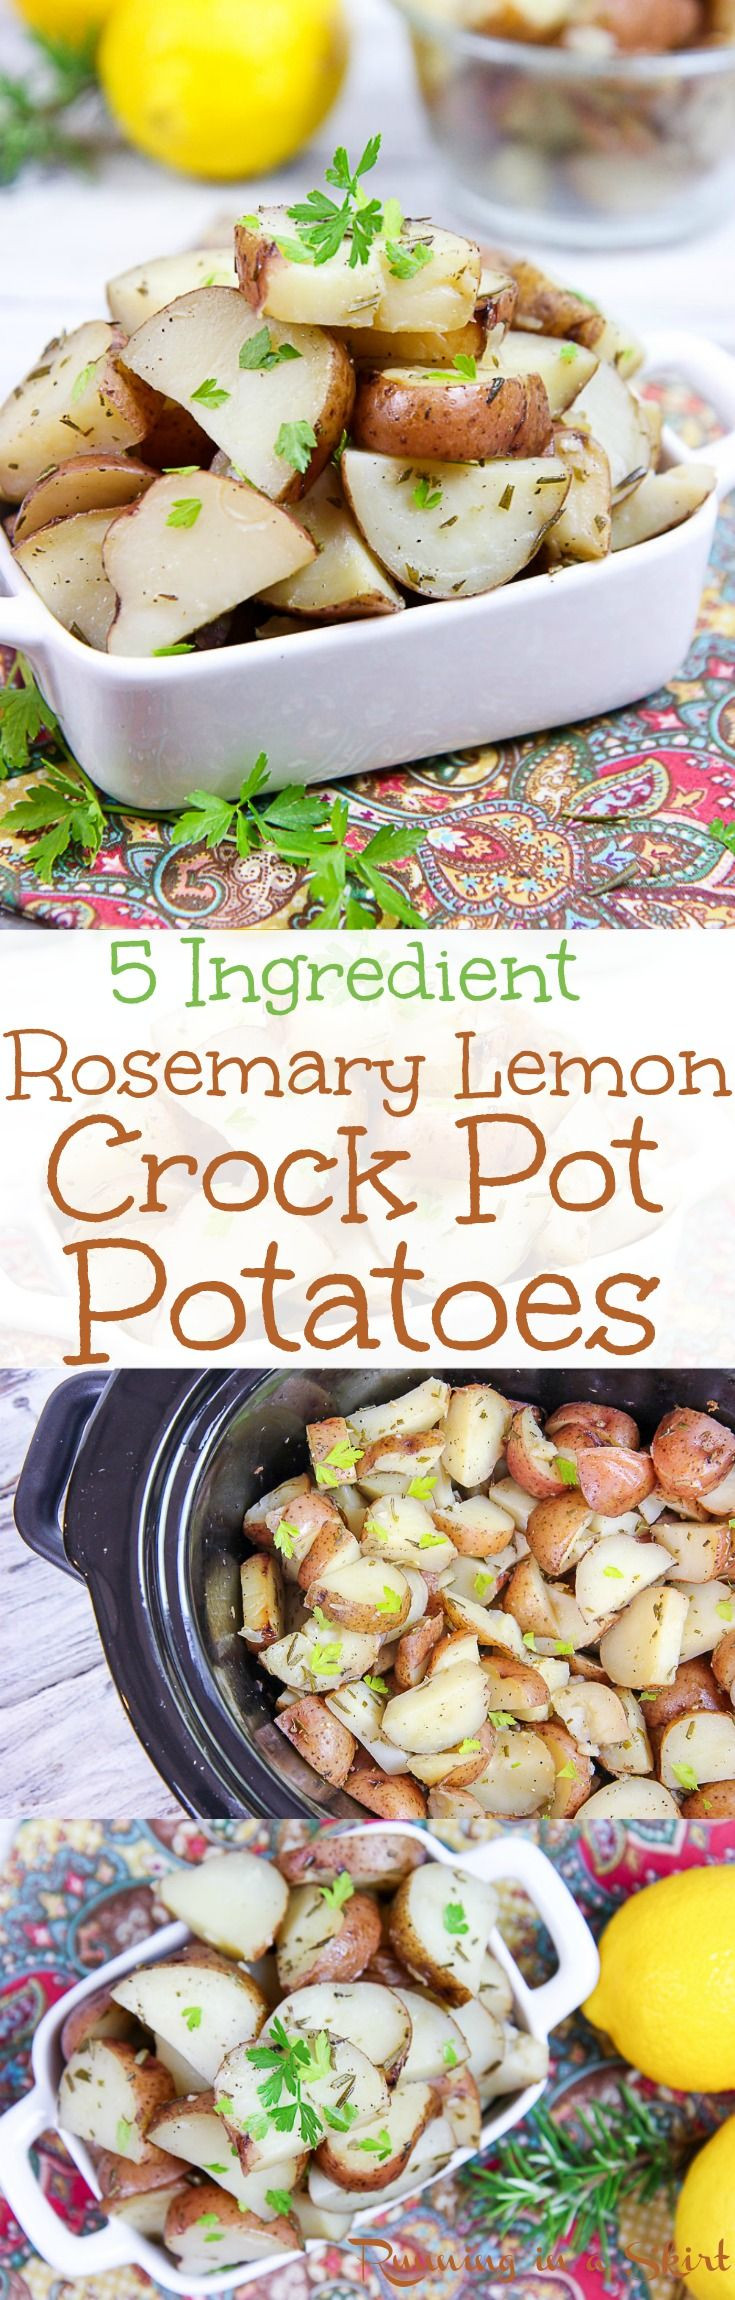 Healthy 5 Ingredient Slow Cooker Recipes
 154 best Crockpot Creations images on Pinterest